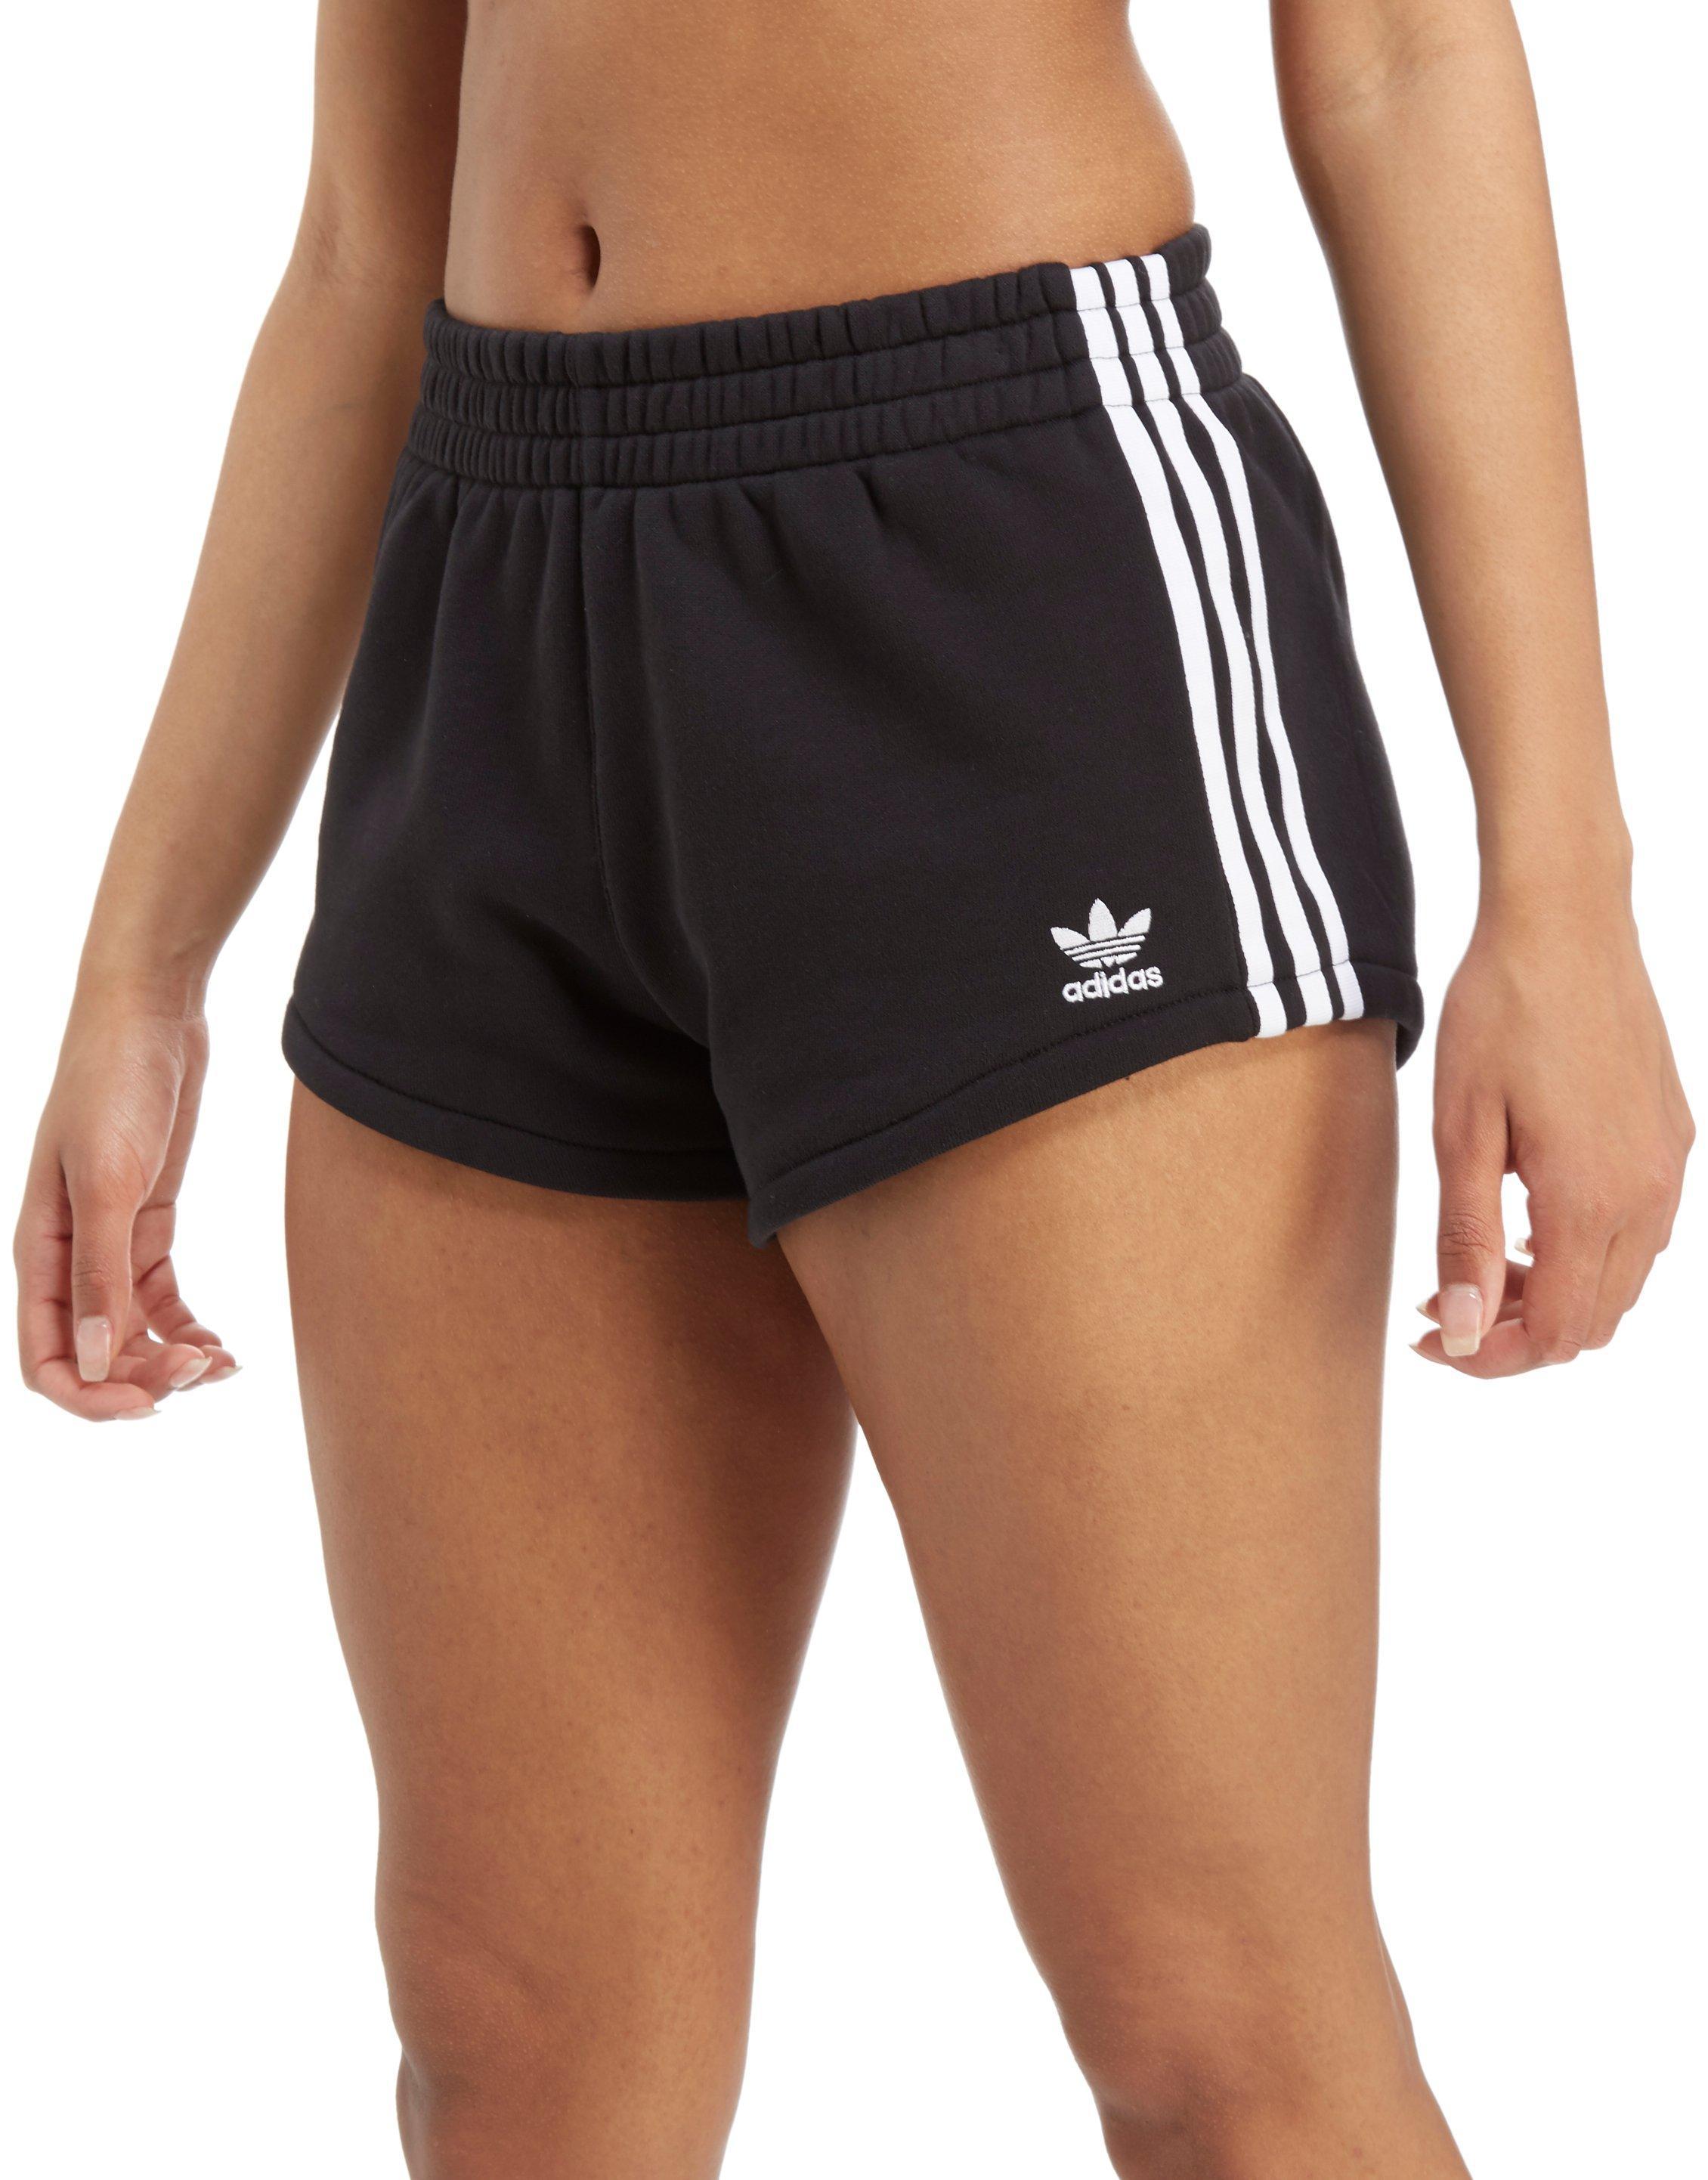 adidas Cotton Terry Shorts Womens in 